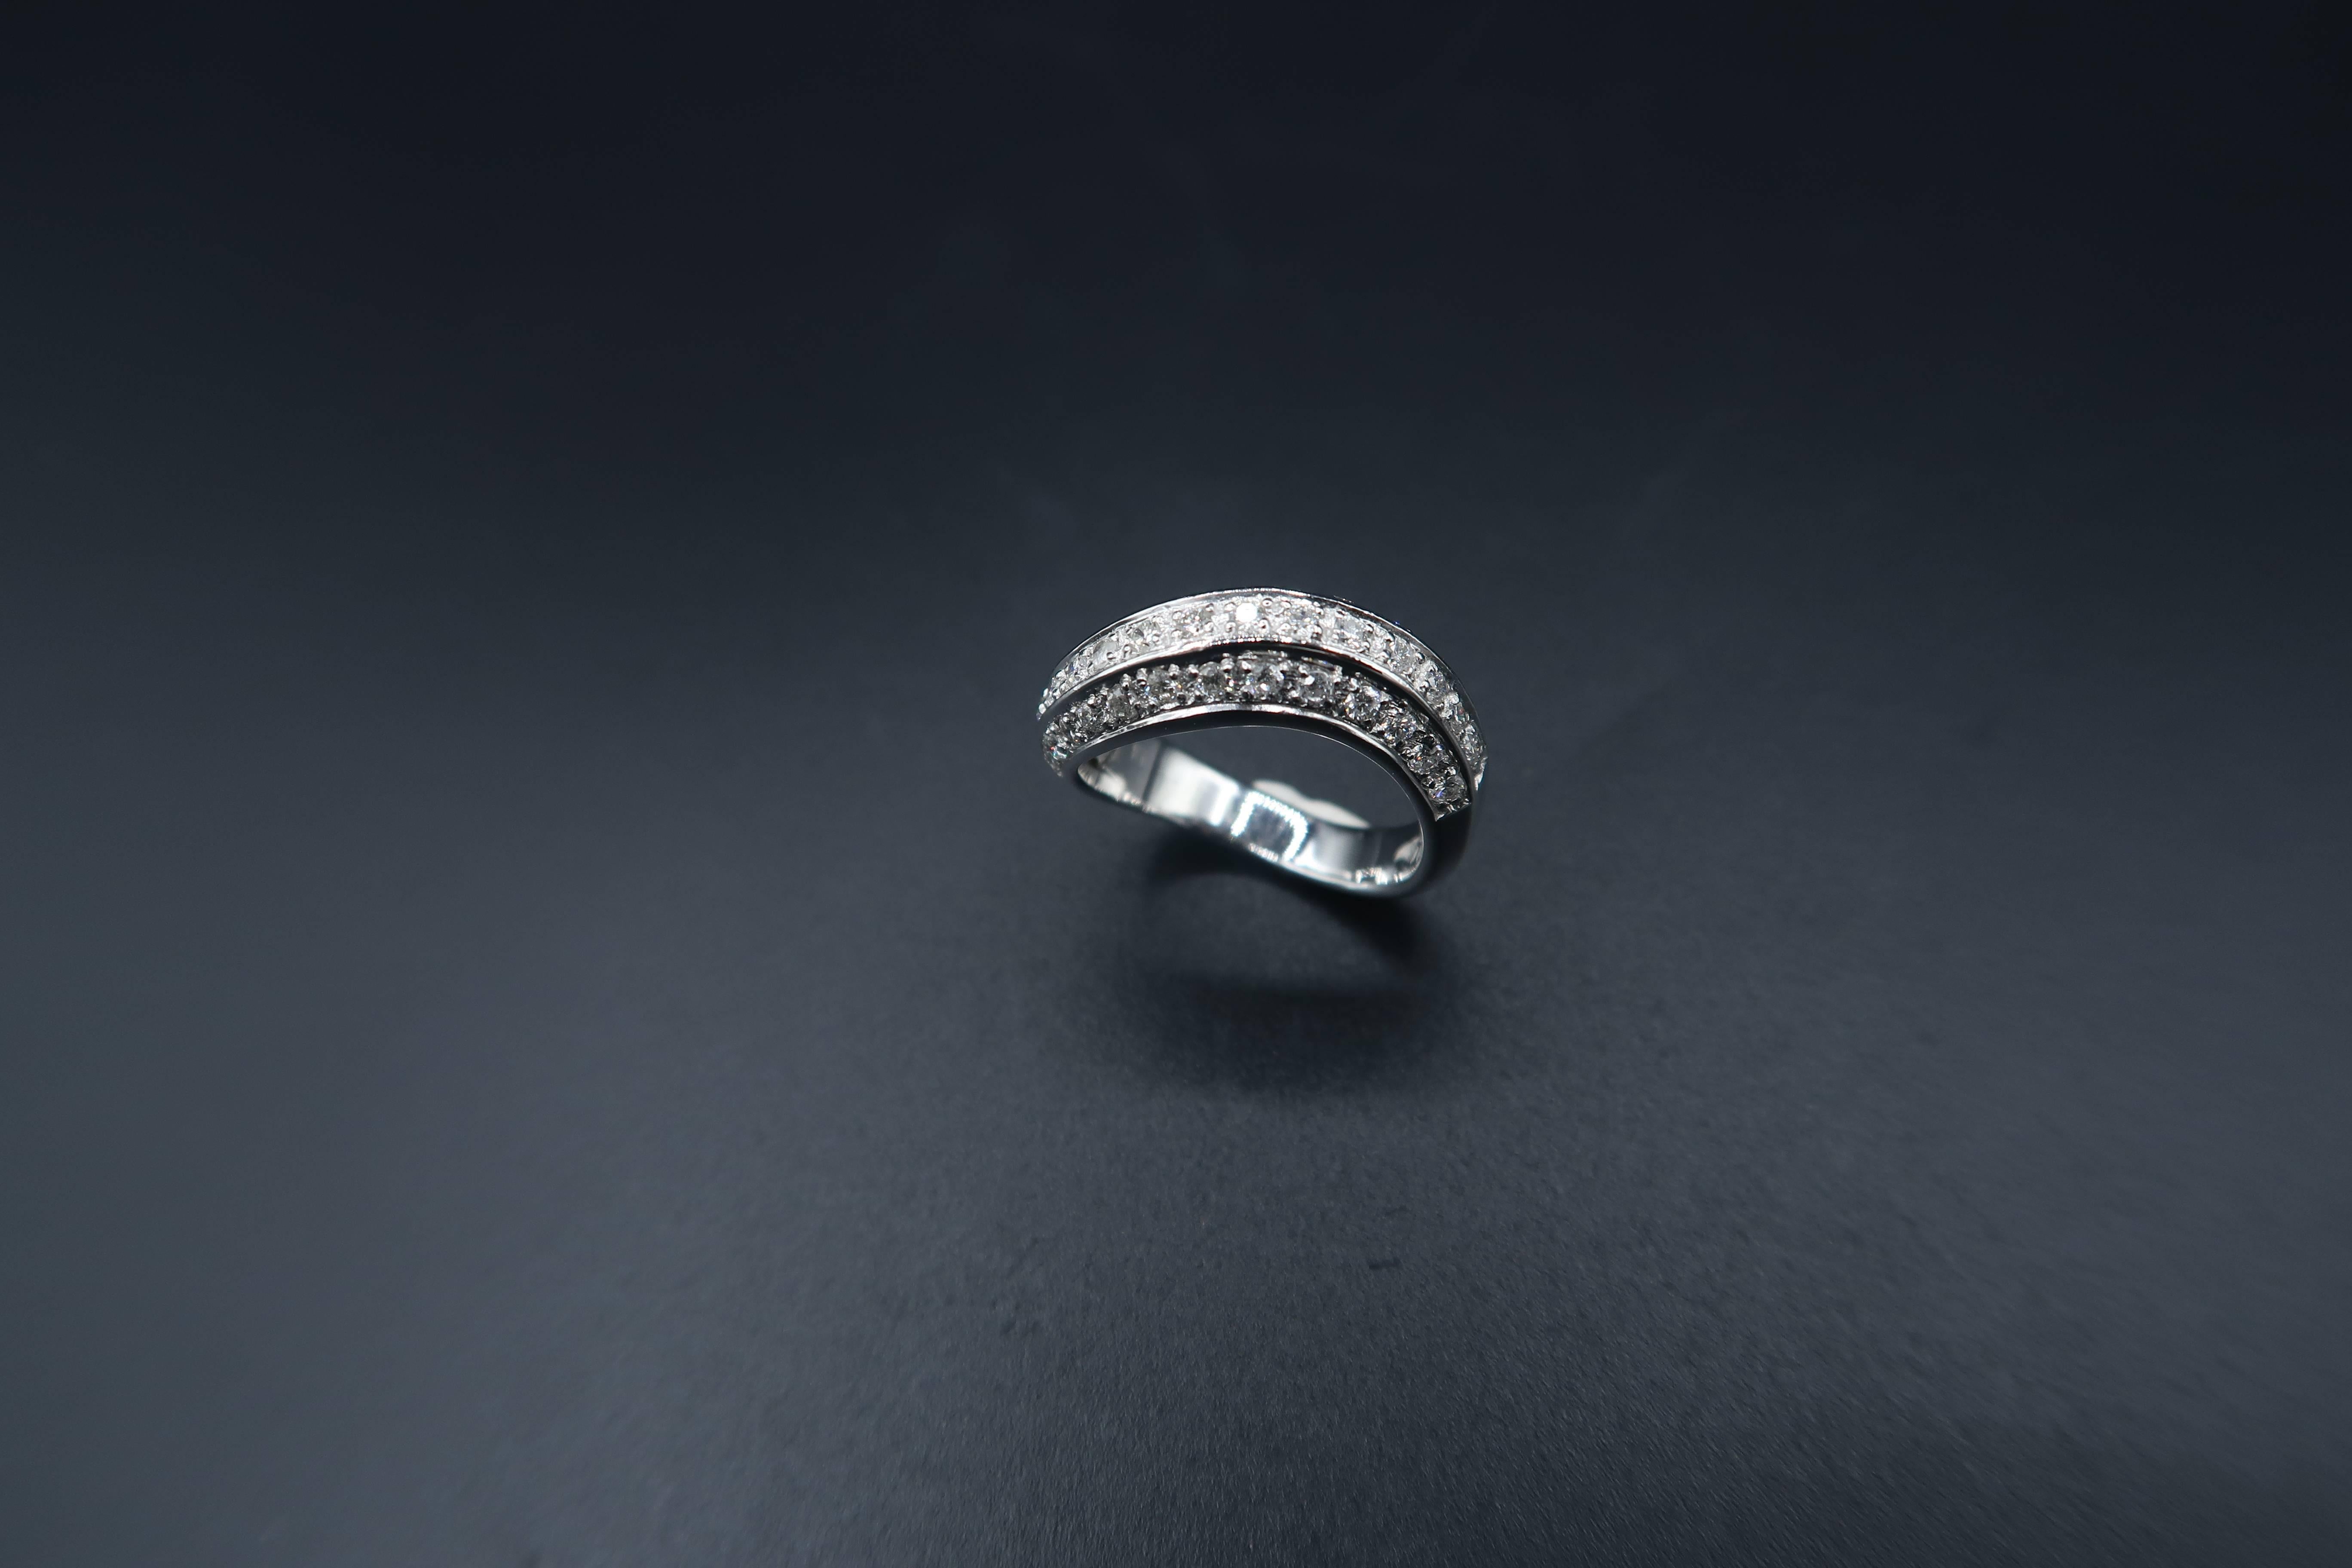 This 18K wavy white gold band ring is surrounded by round white diamonds, and finished with white gold edge.

Ring size: 50, UK J 1/2

Gold : 18K White Gold 5.409 g
Diamond : 0.70 ct